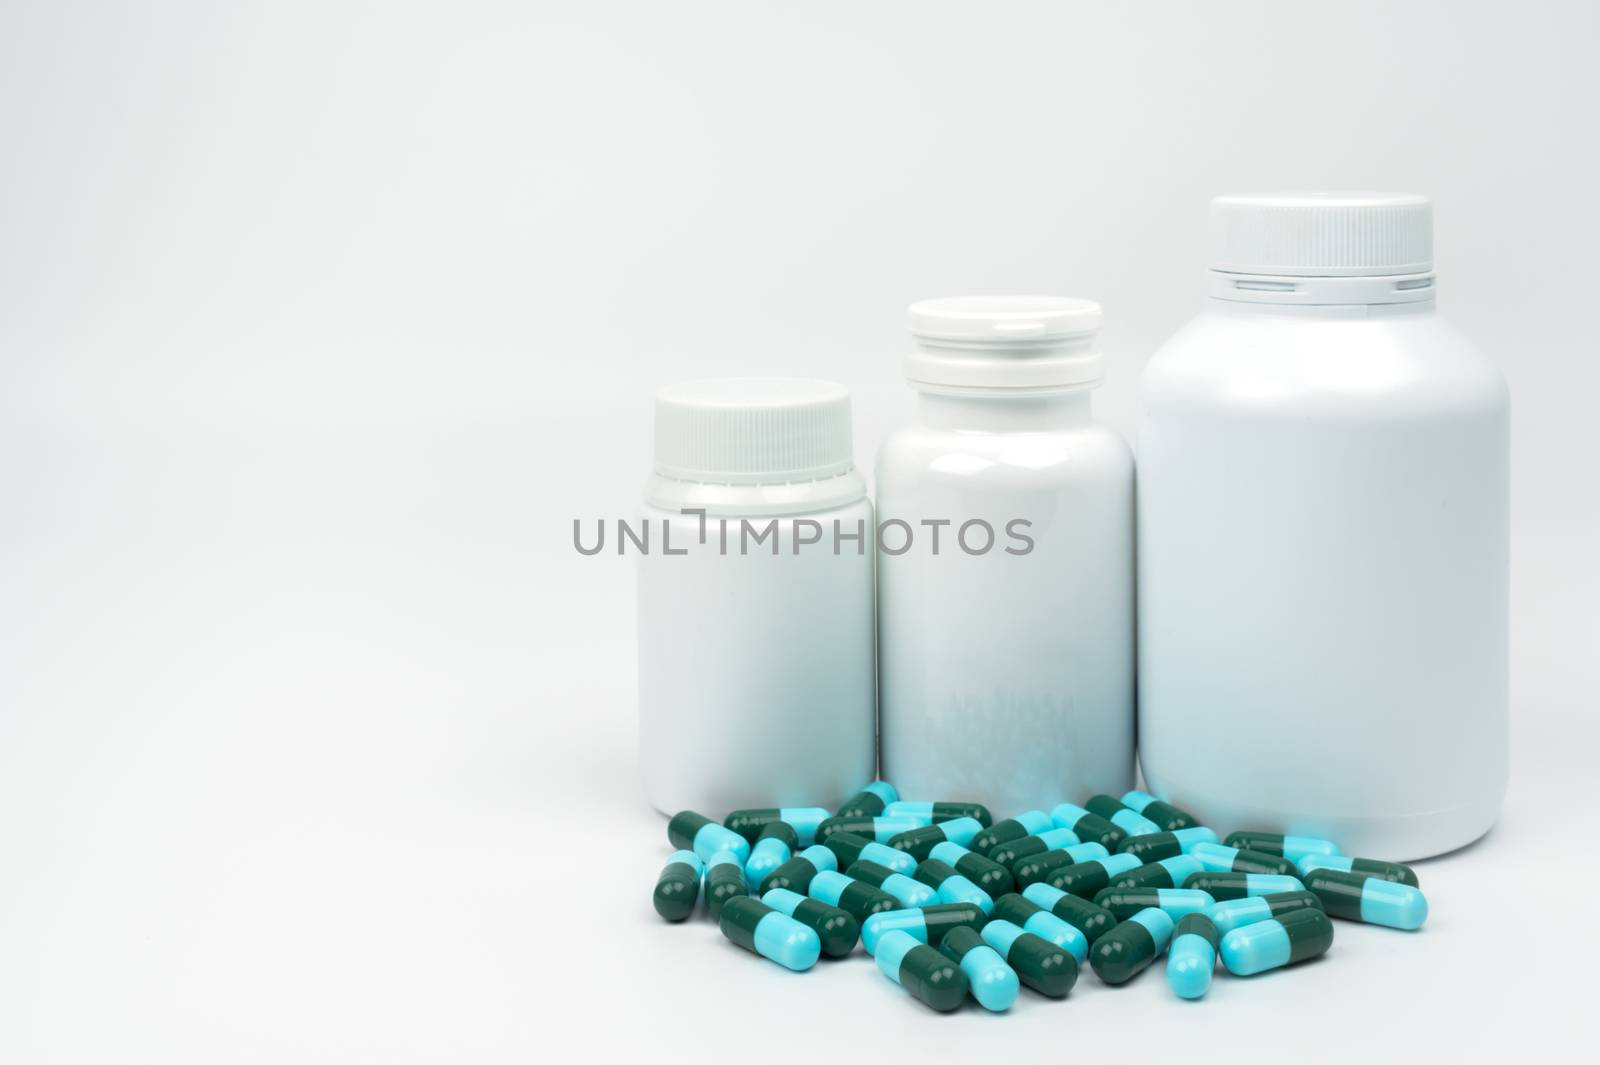 Antibiotic capsule pills and plastic bottle with blank label isolated on white background with copy space. Drug resistance concept. Antibiotics drug use with reasonable and global healthcare concept. Pharmaceutical industry. Pharmacy background. Health budgets and policy concept. by Fahroni